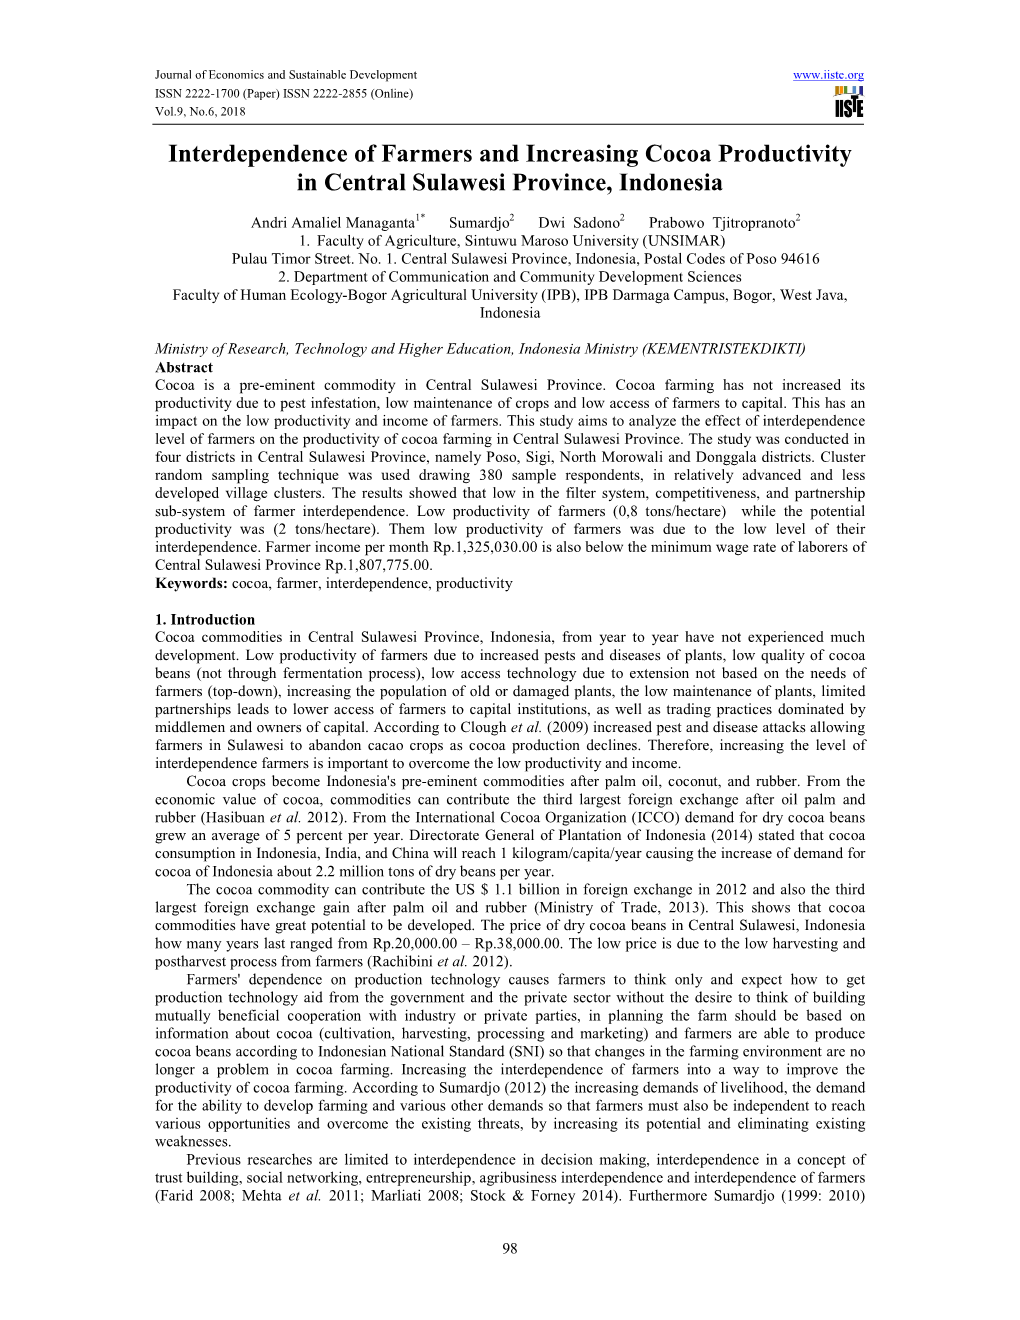 Interdependence of Farmers and Increasing Cocoa Productivity in Central Sulawesi Province, Indonesia